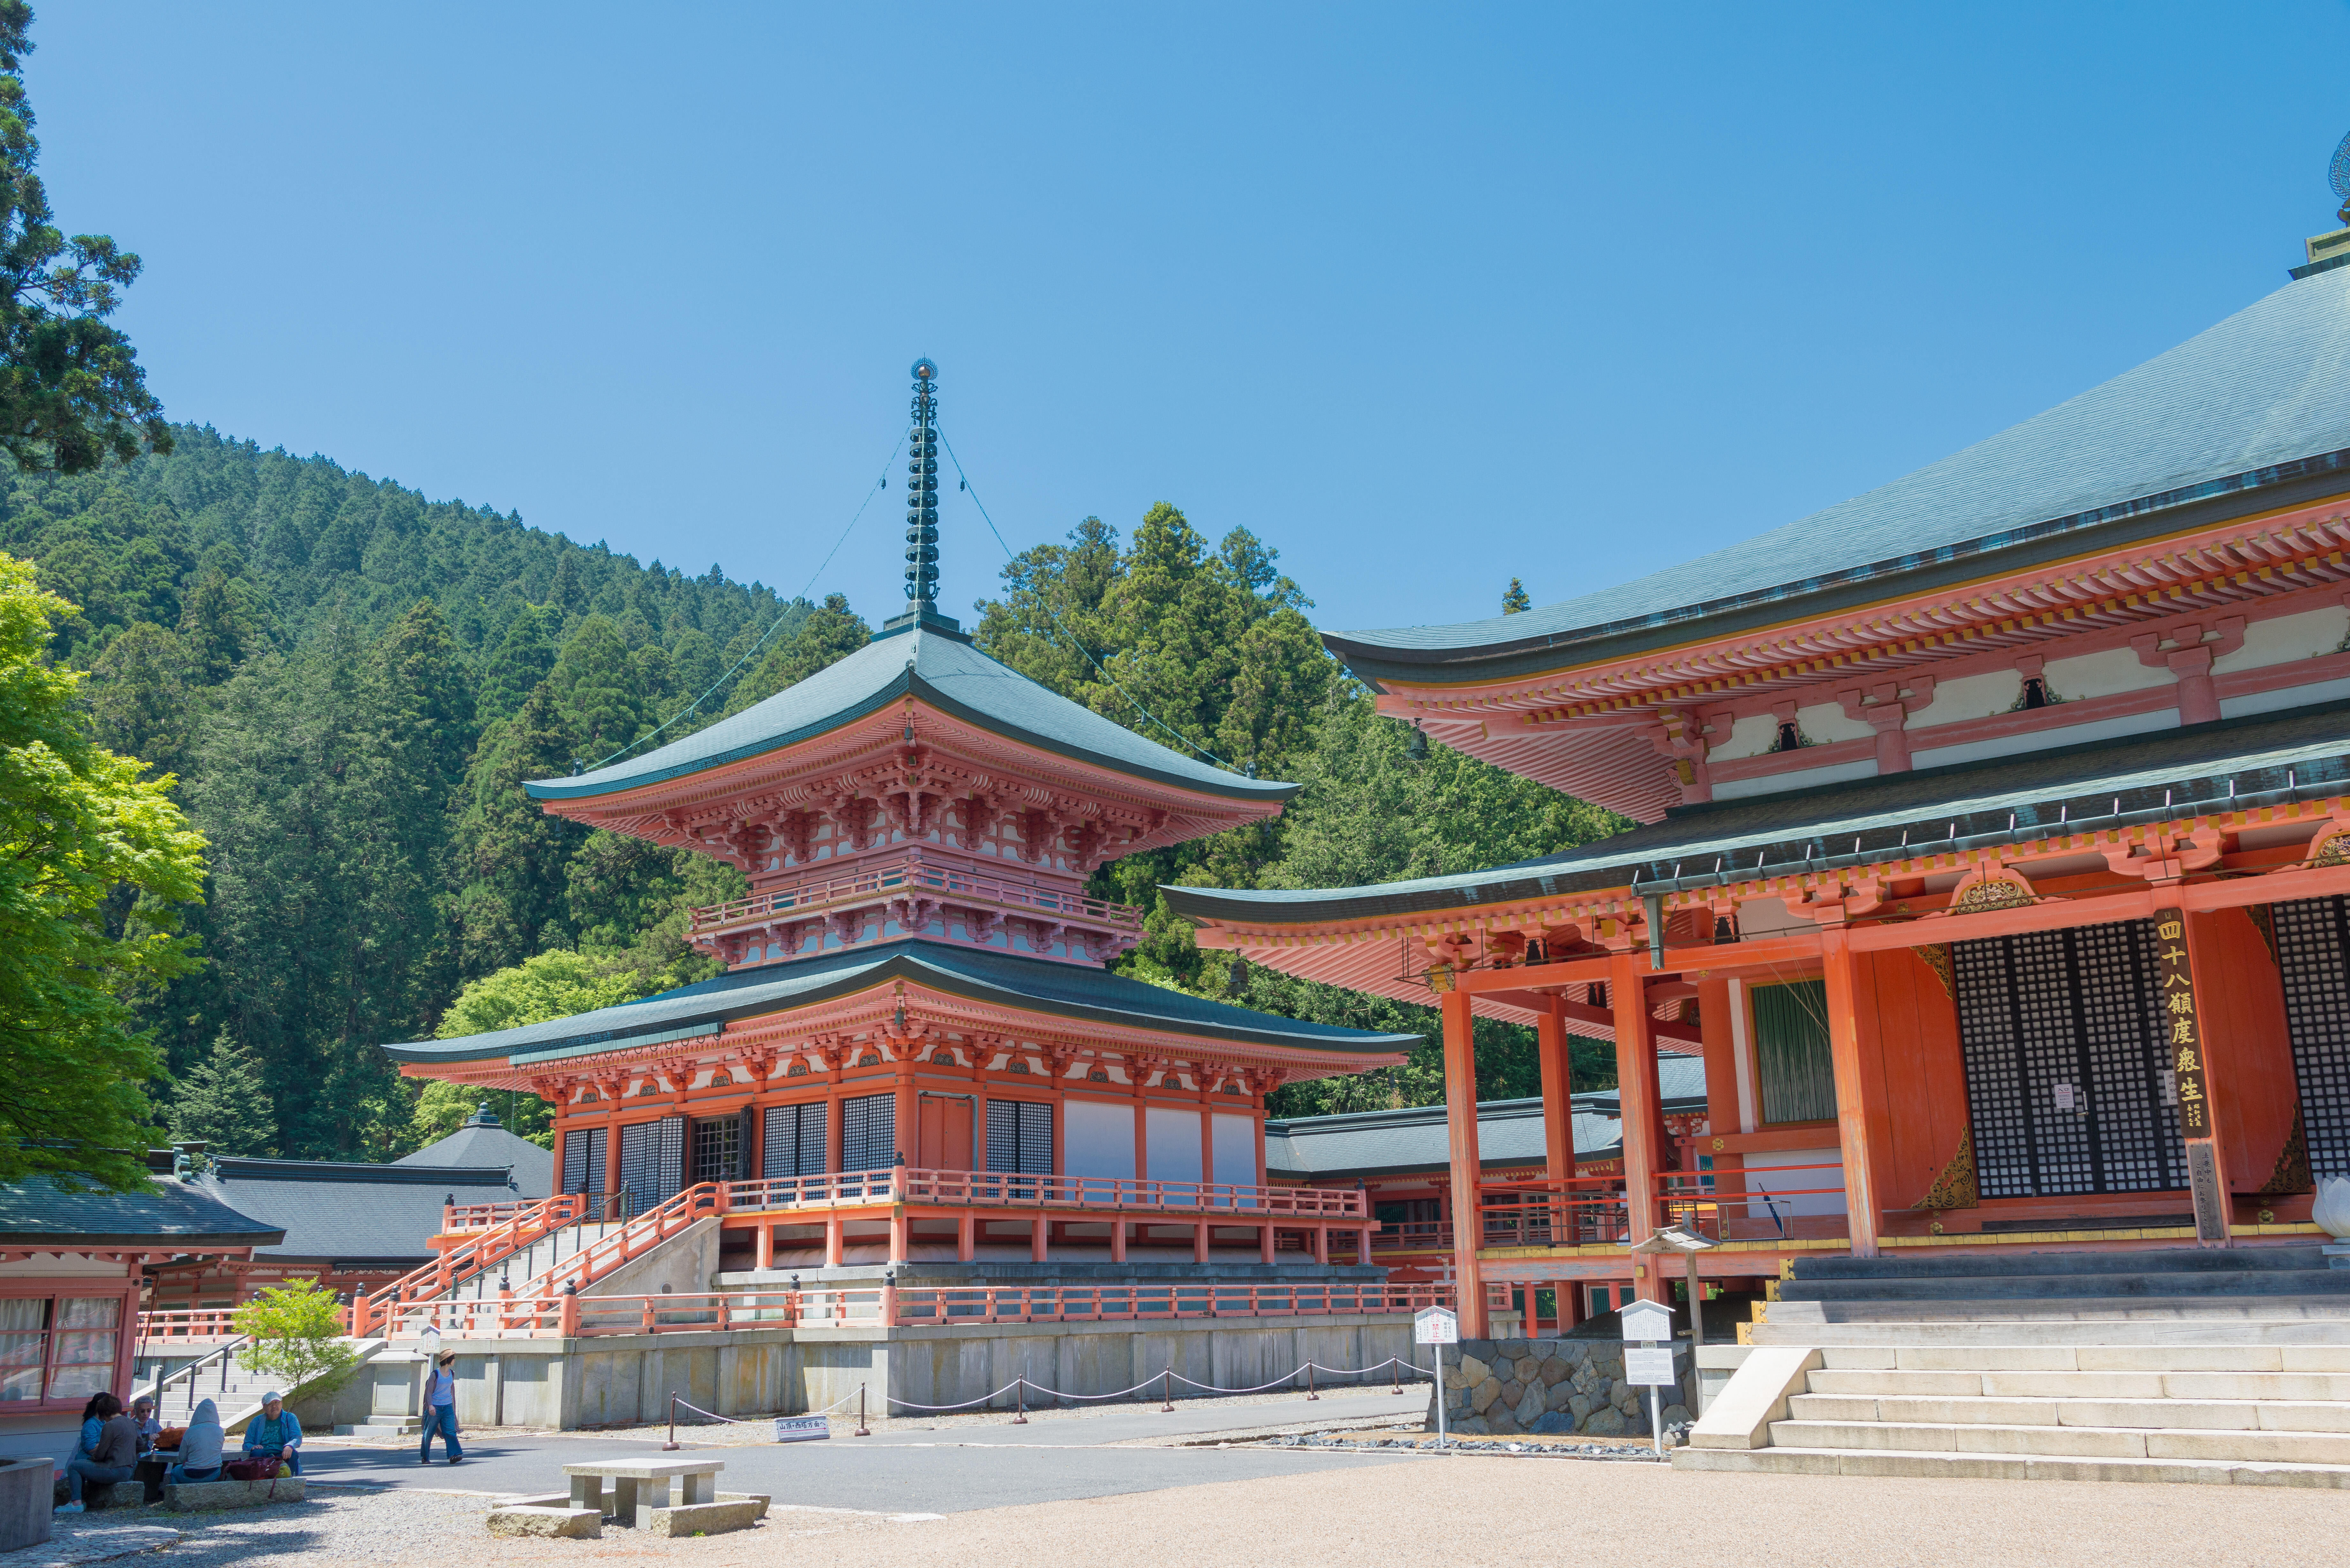 The marathon monks of Mount Hiei: Lessons in soulfulness